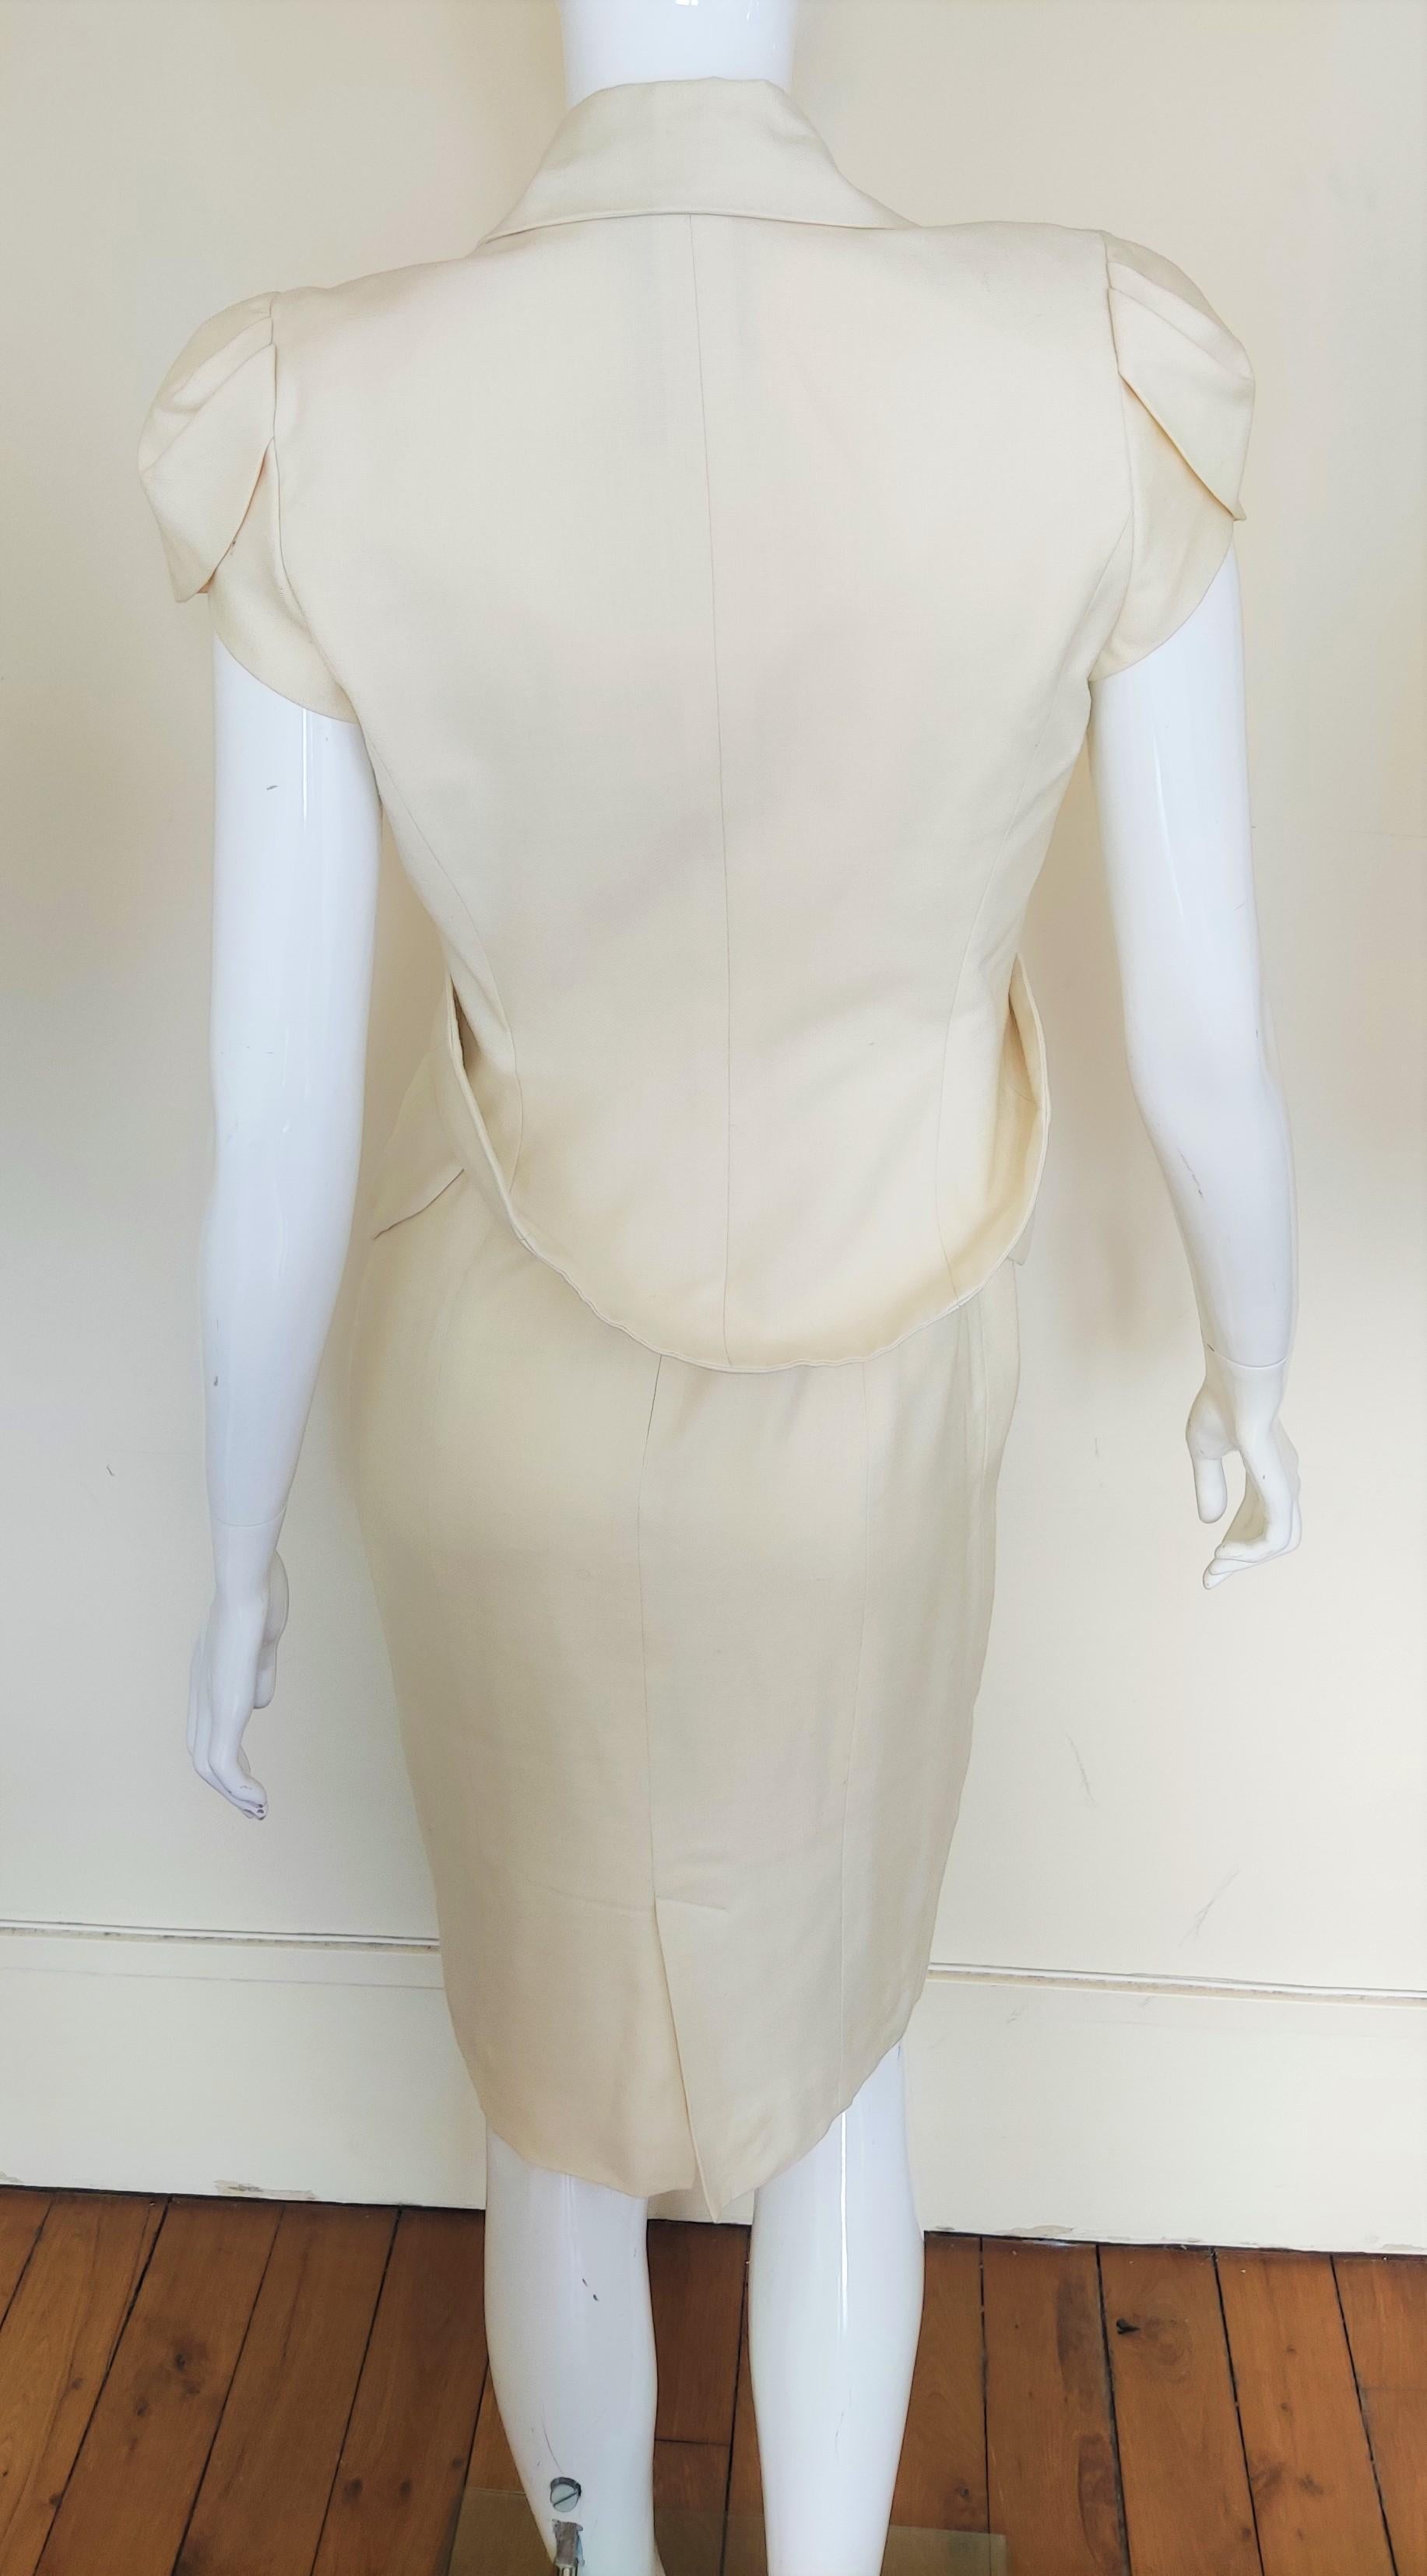 Early John Galliano S/S 1999 Runway Vintage Ivory Ensemble Dress Costume Suit For Sale 9